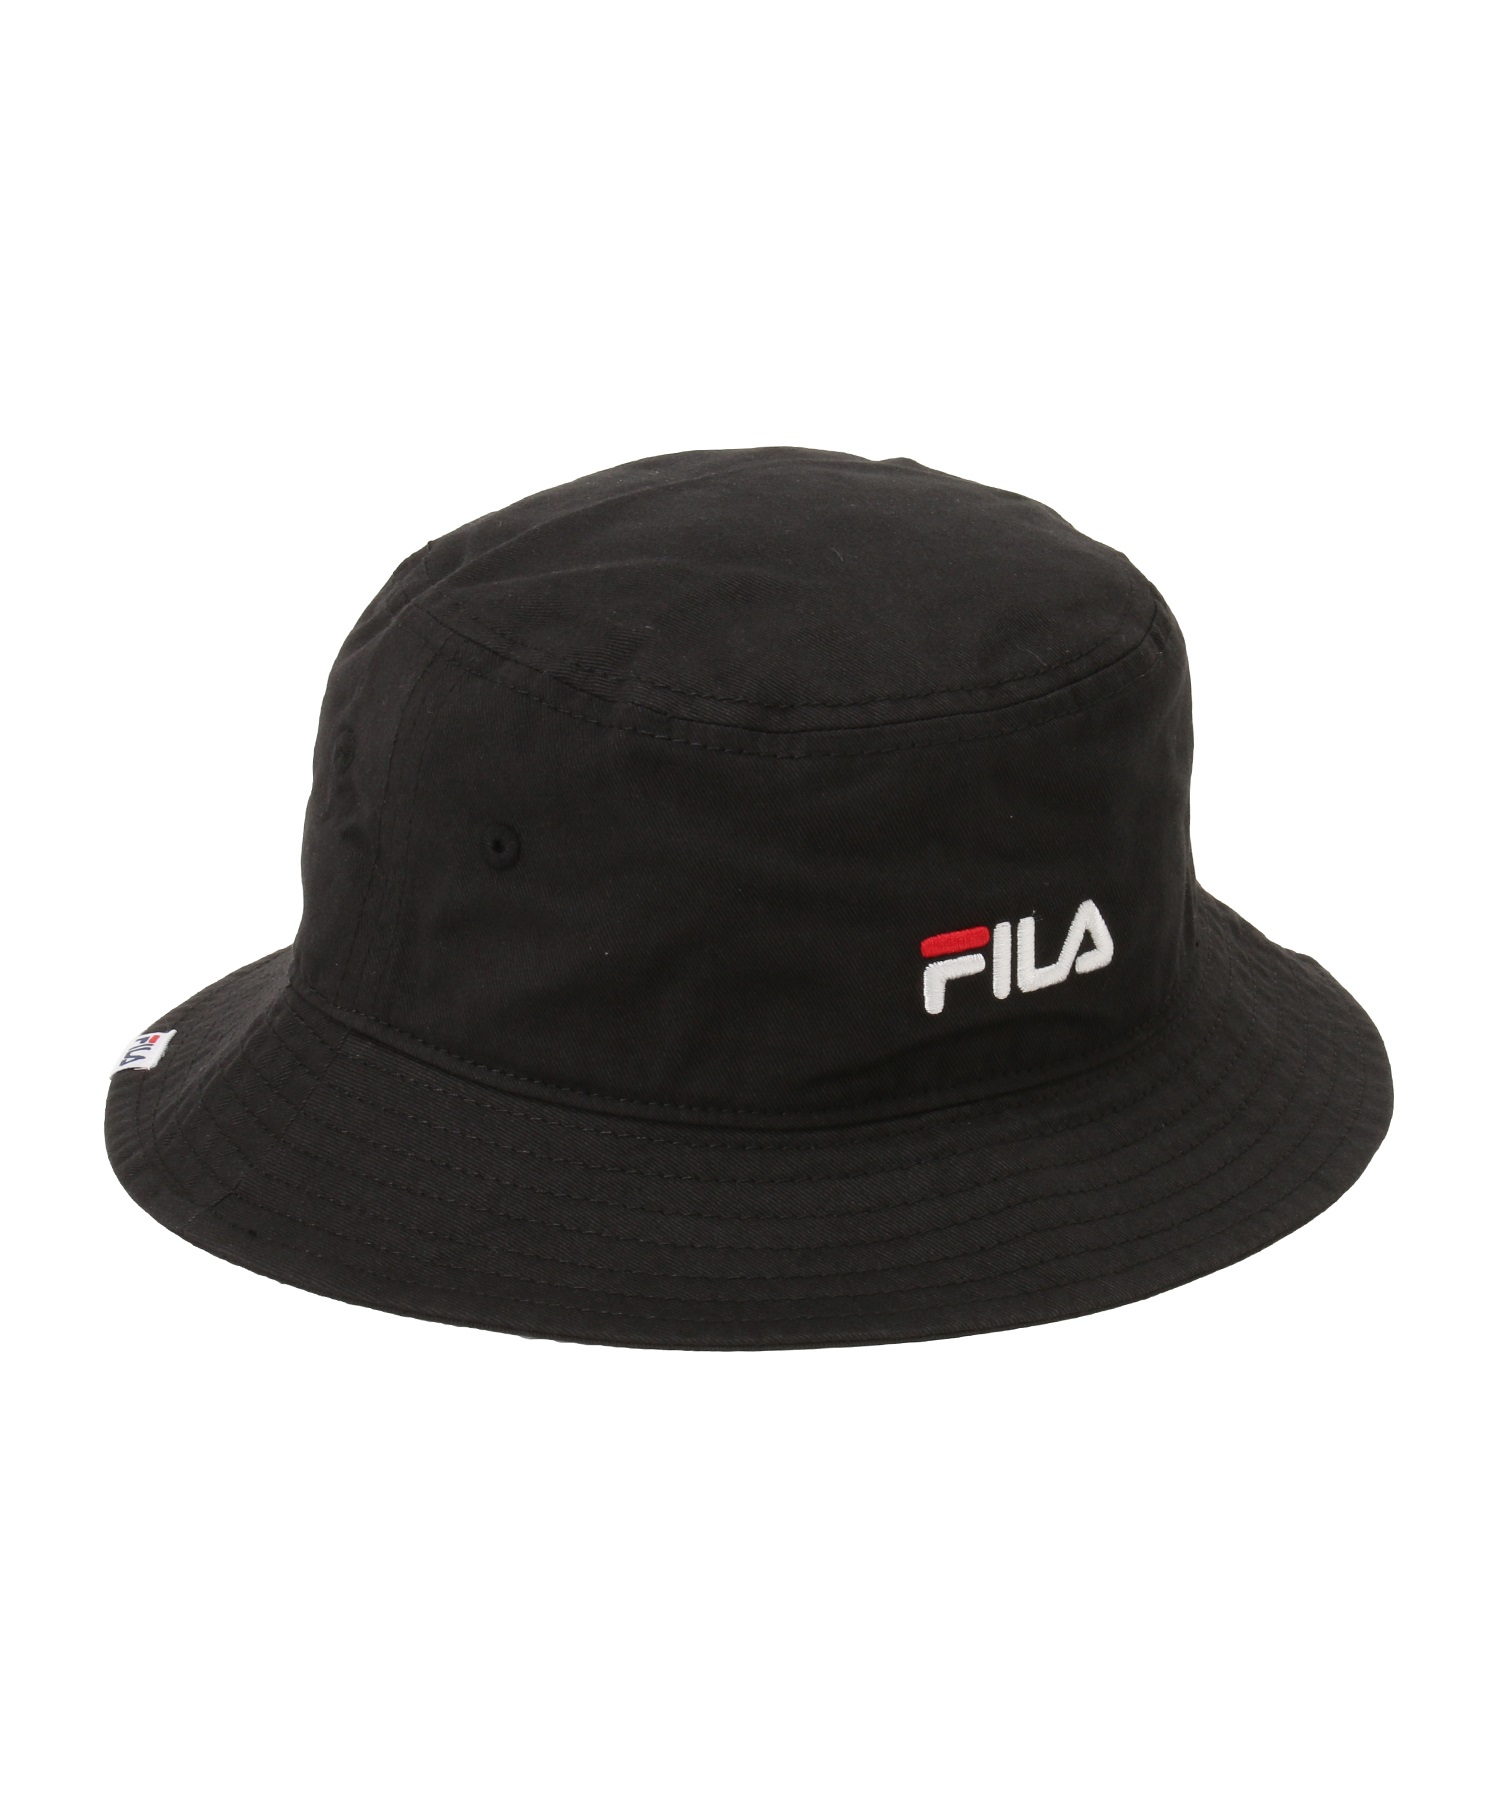 FILA/フィラ キッズ ハット 117113702(BE-56)